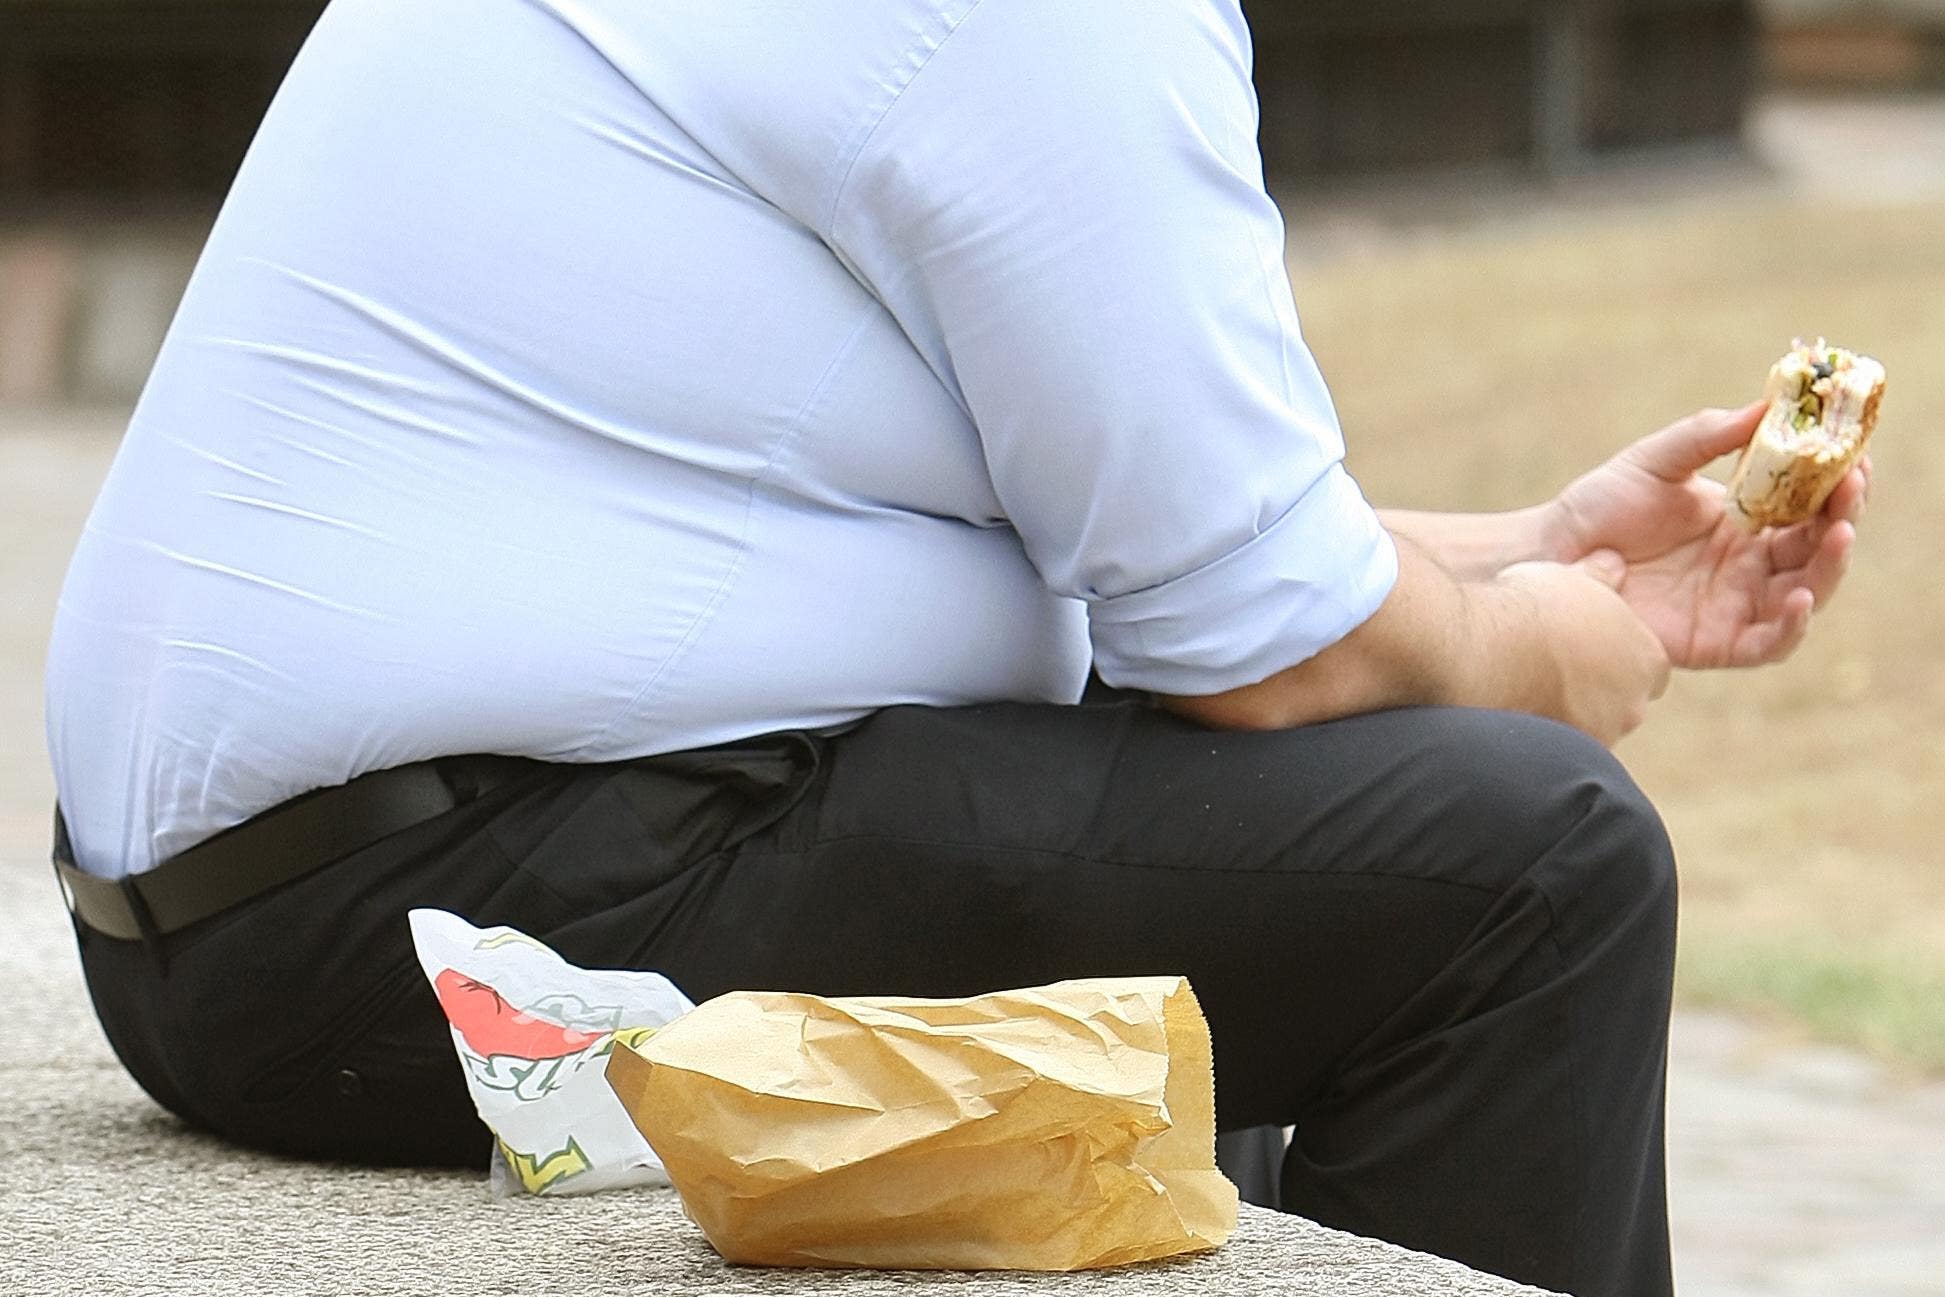 The Welsh Government aim to tackle obesity by restricting the promotion and placement of unhealthy food in shops. (PA)